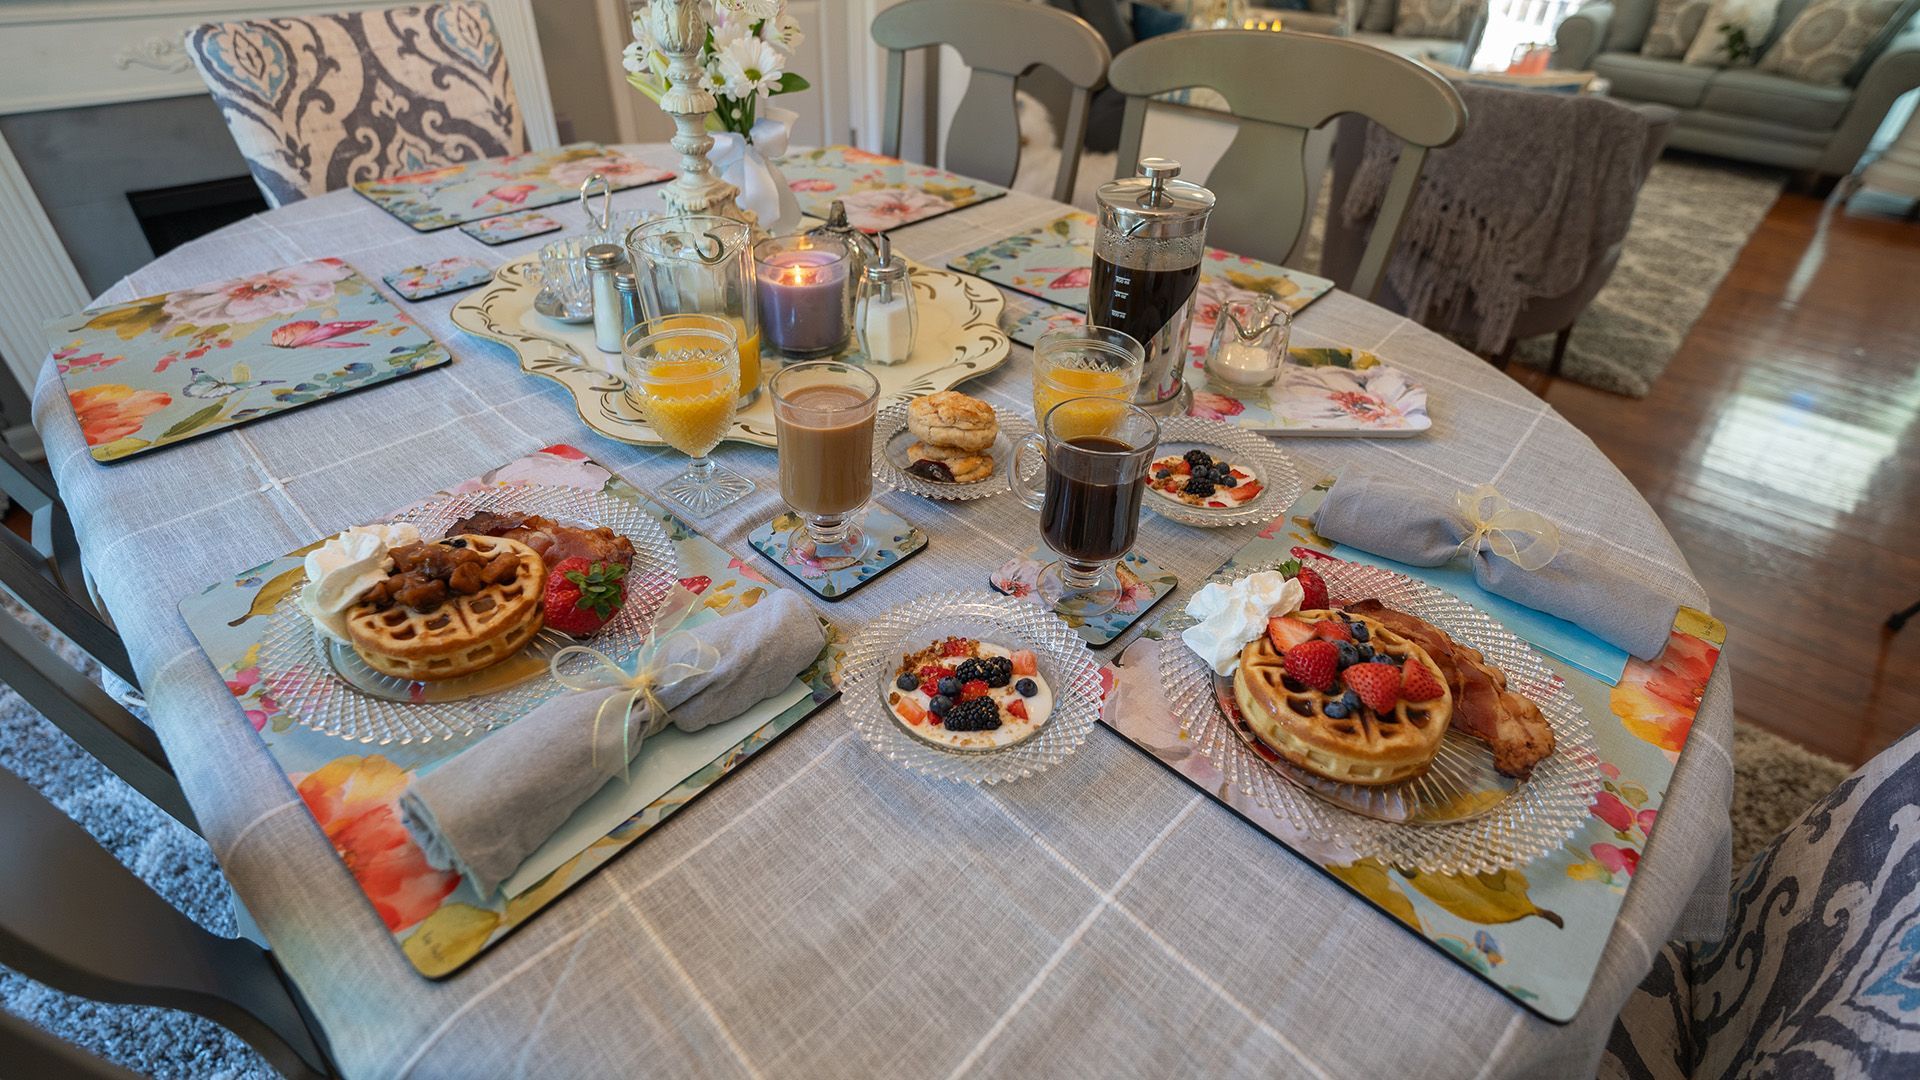 a table with plates of food and drinks including a french press, waffles and coffee